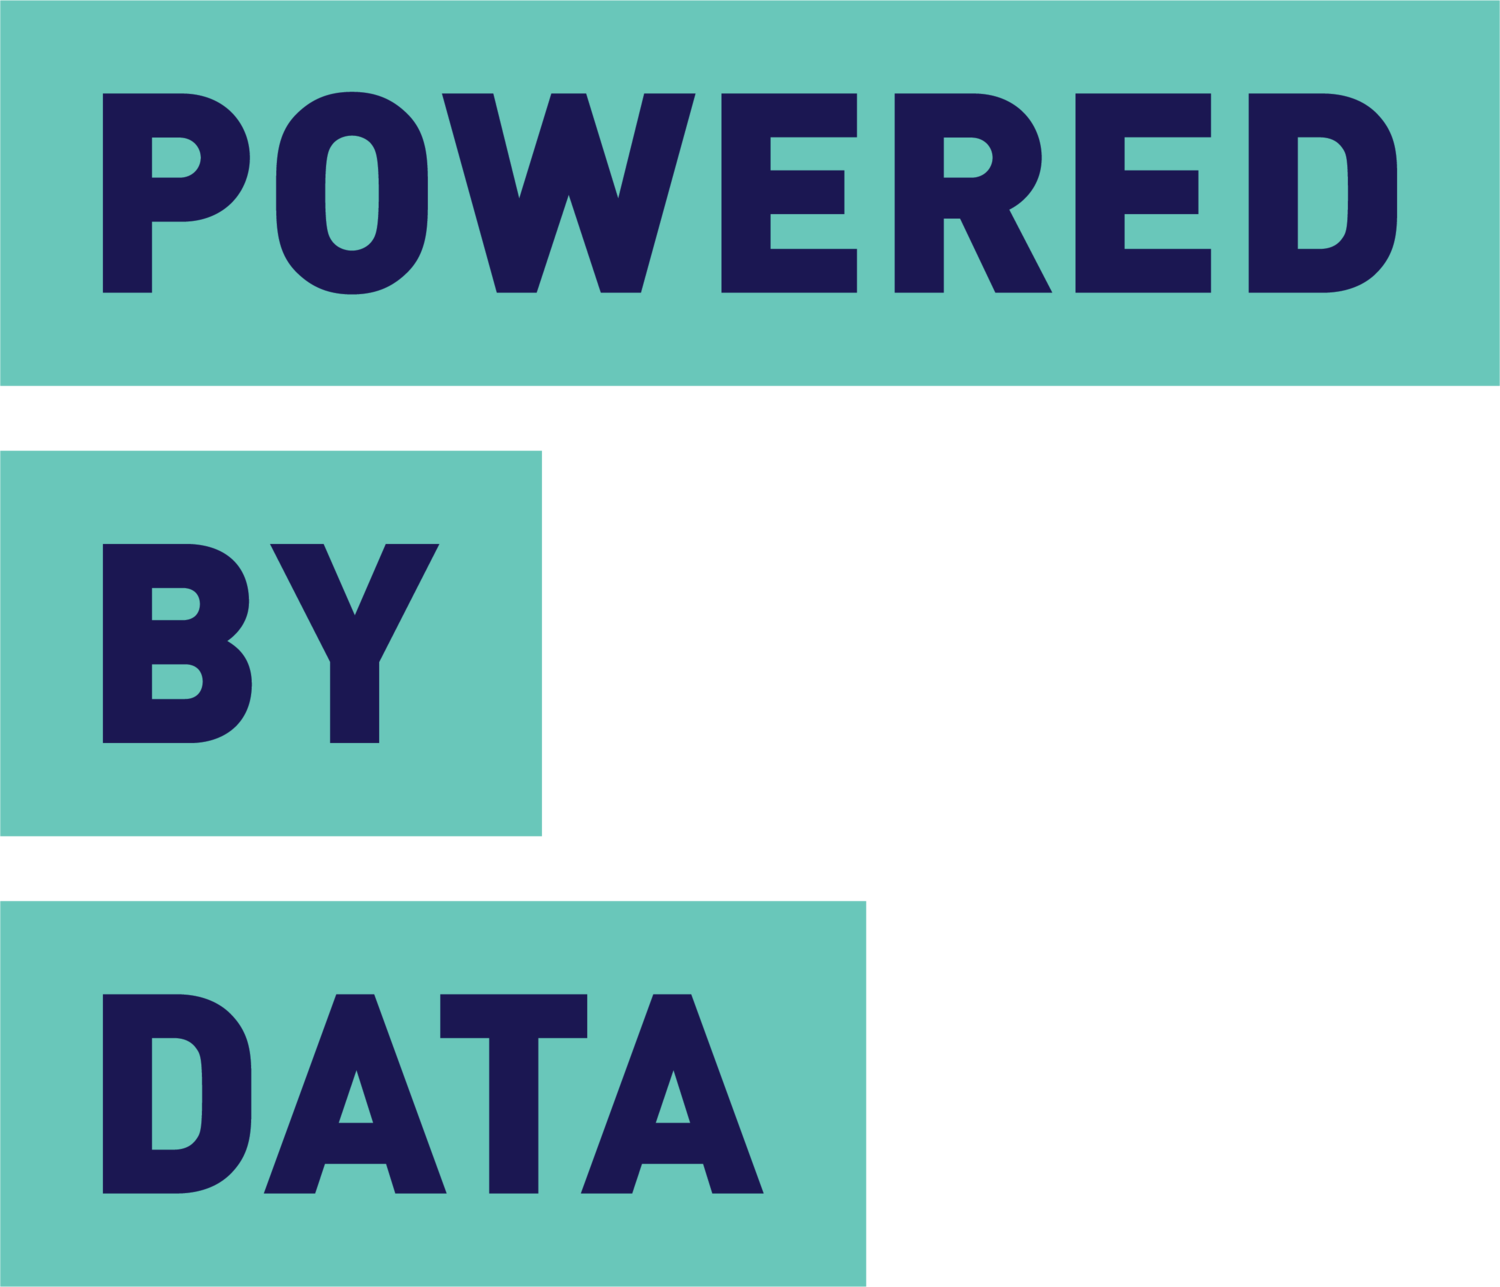 Powered by Data